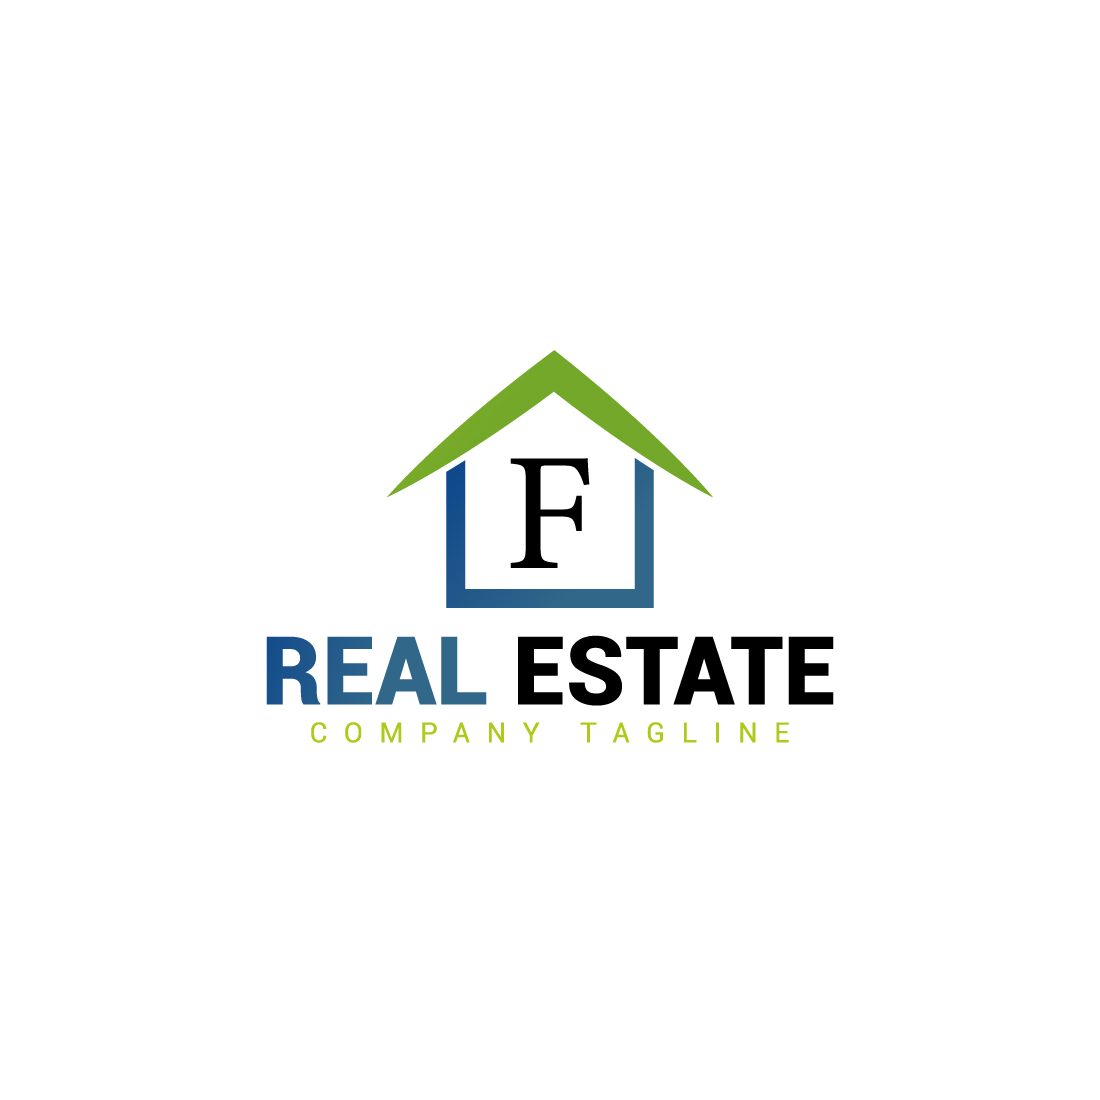 Real estate logo with green, dark blue color and F letter cover image.